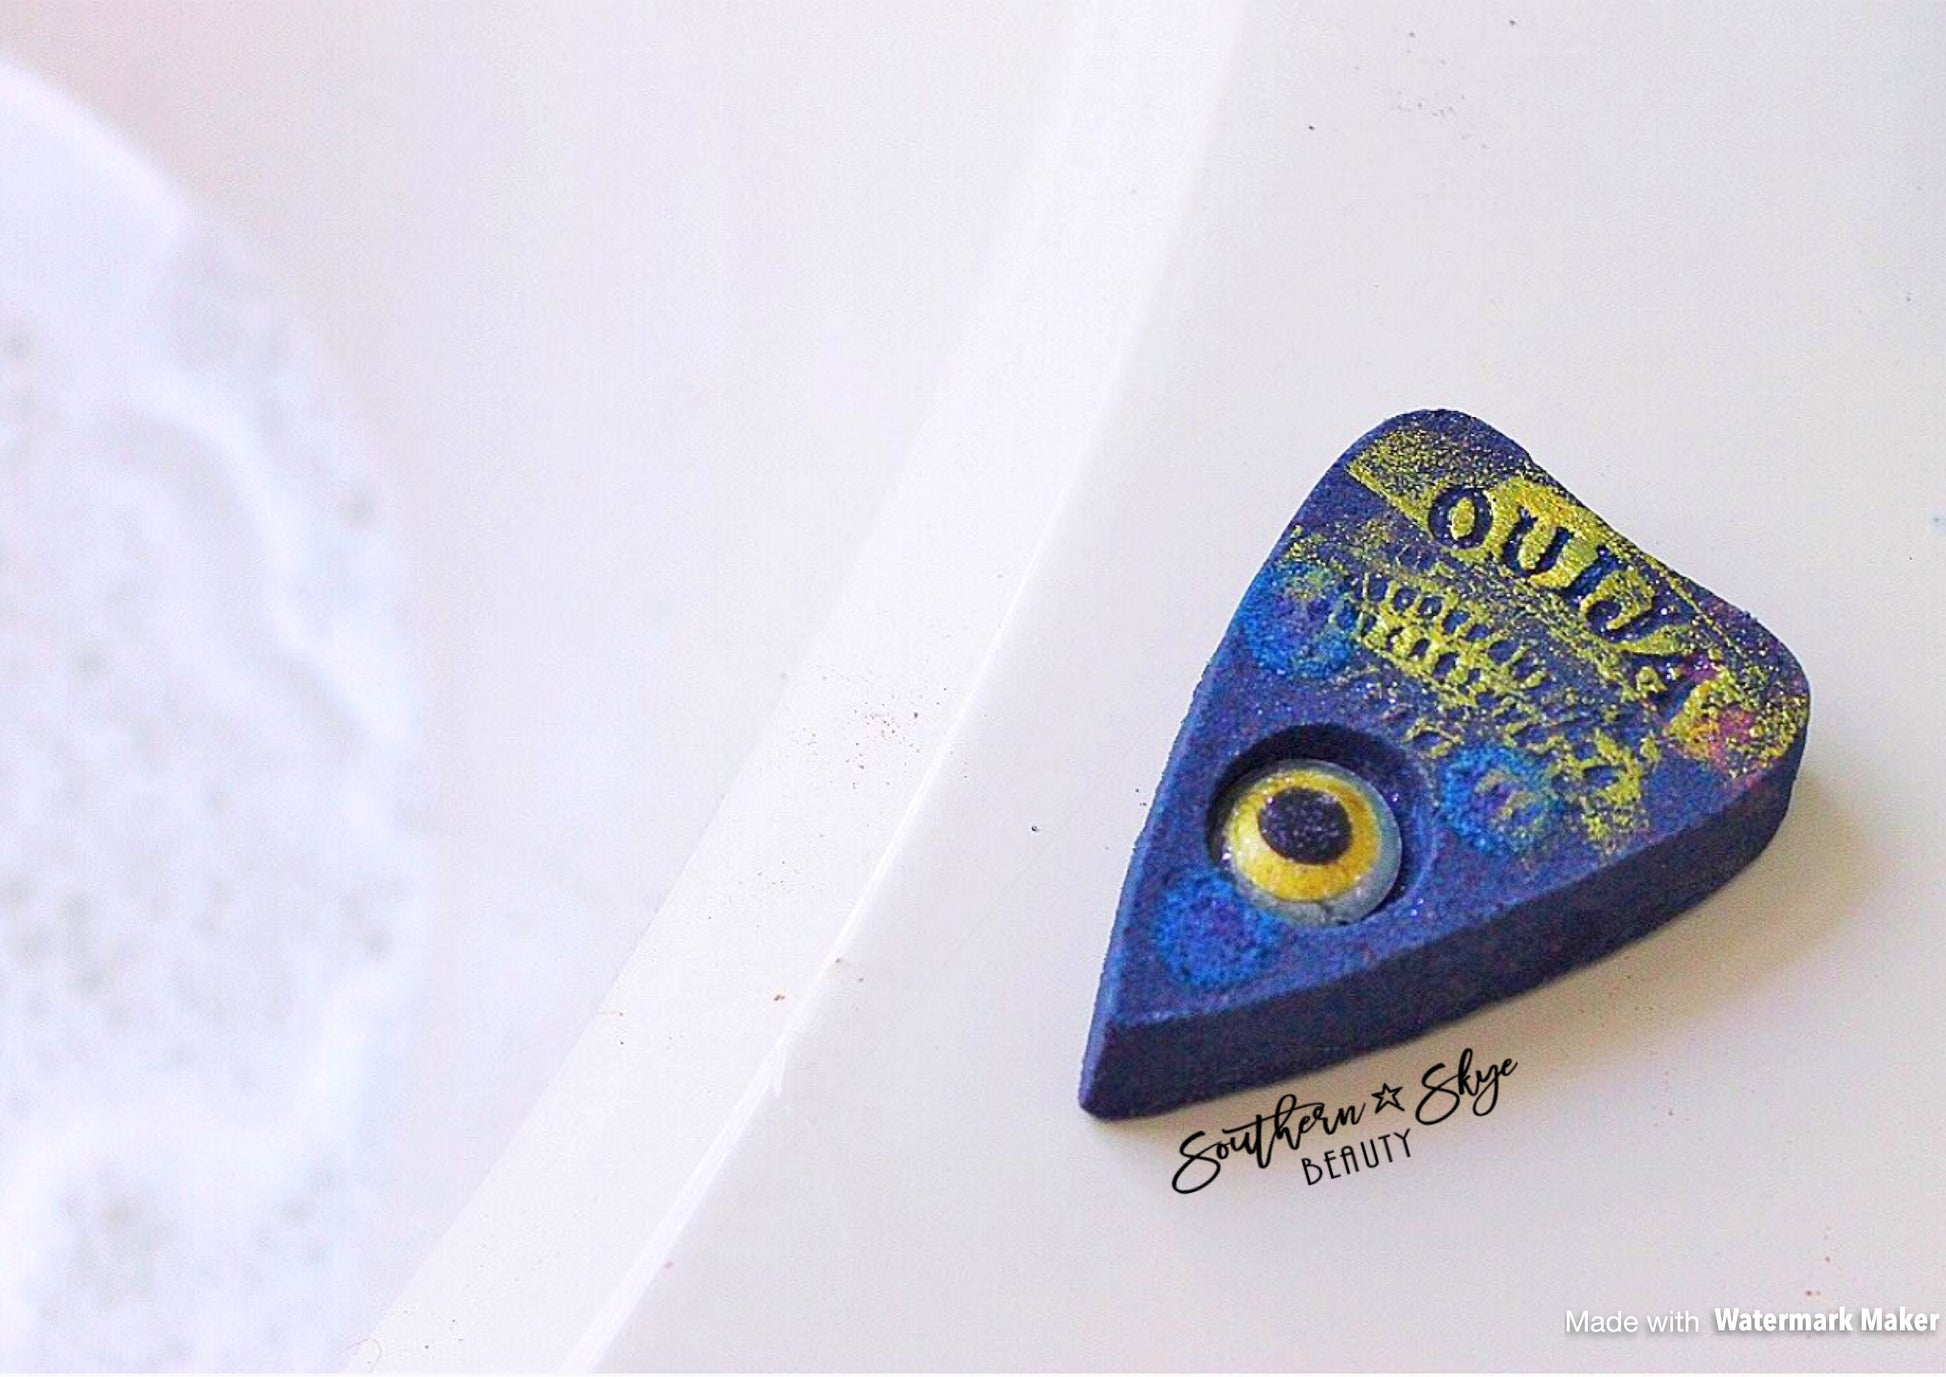 Southern Skye Beauty The Further Bath Bomb - planchette shaped bath bomb with a hand made soap eyeball